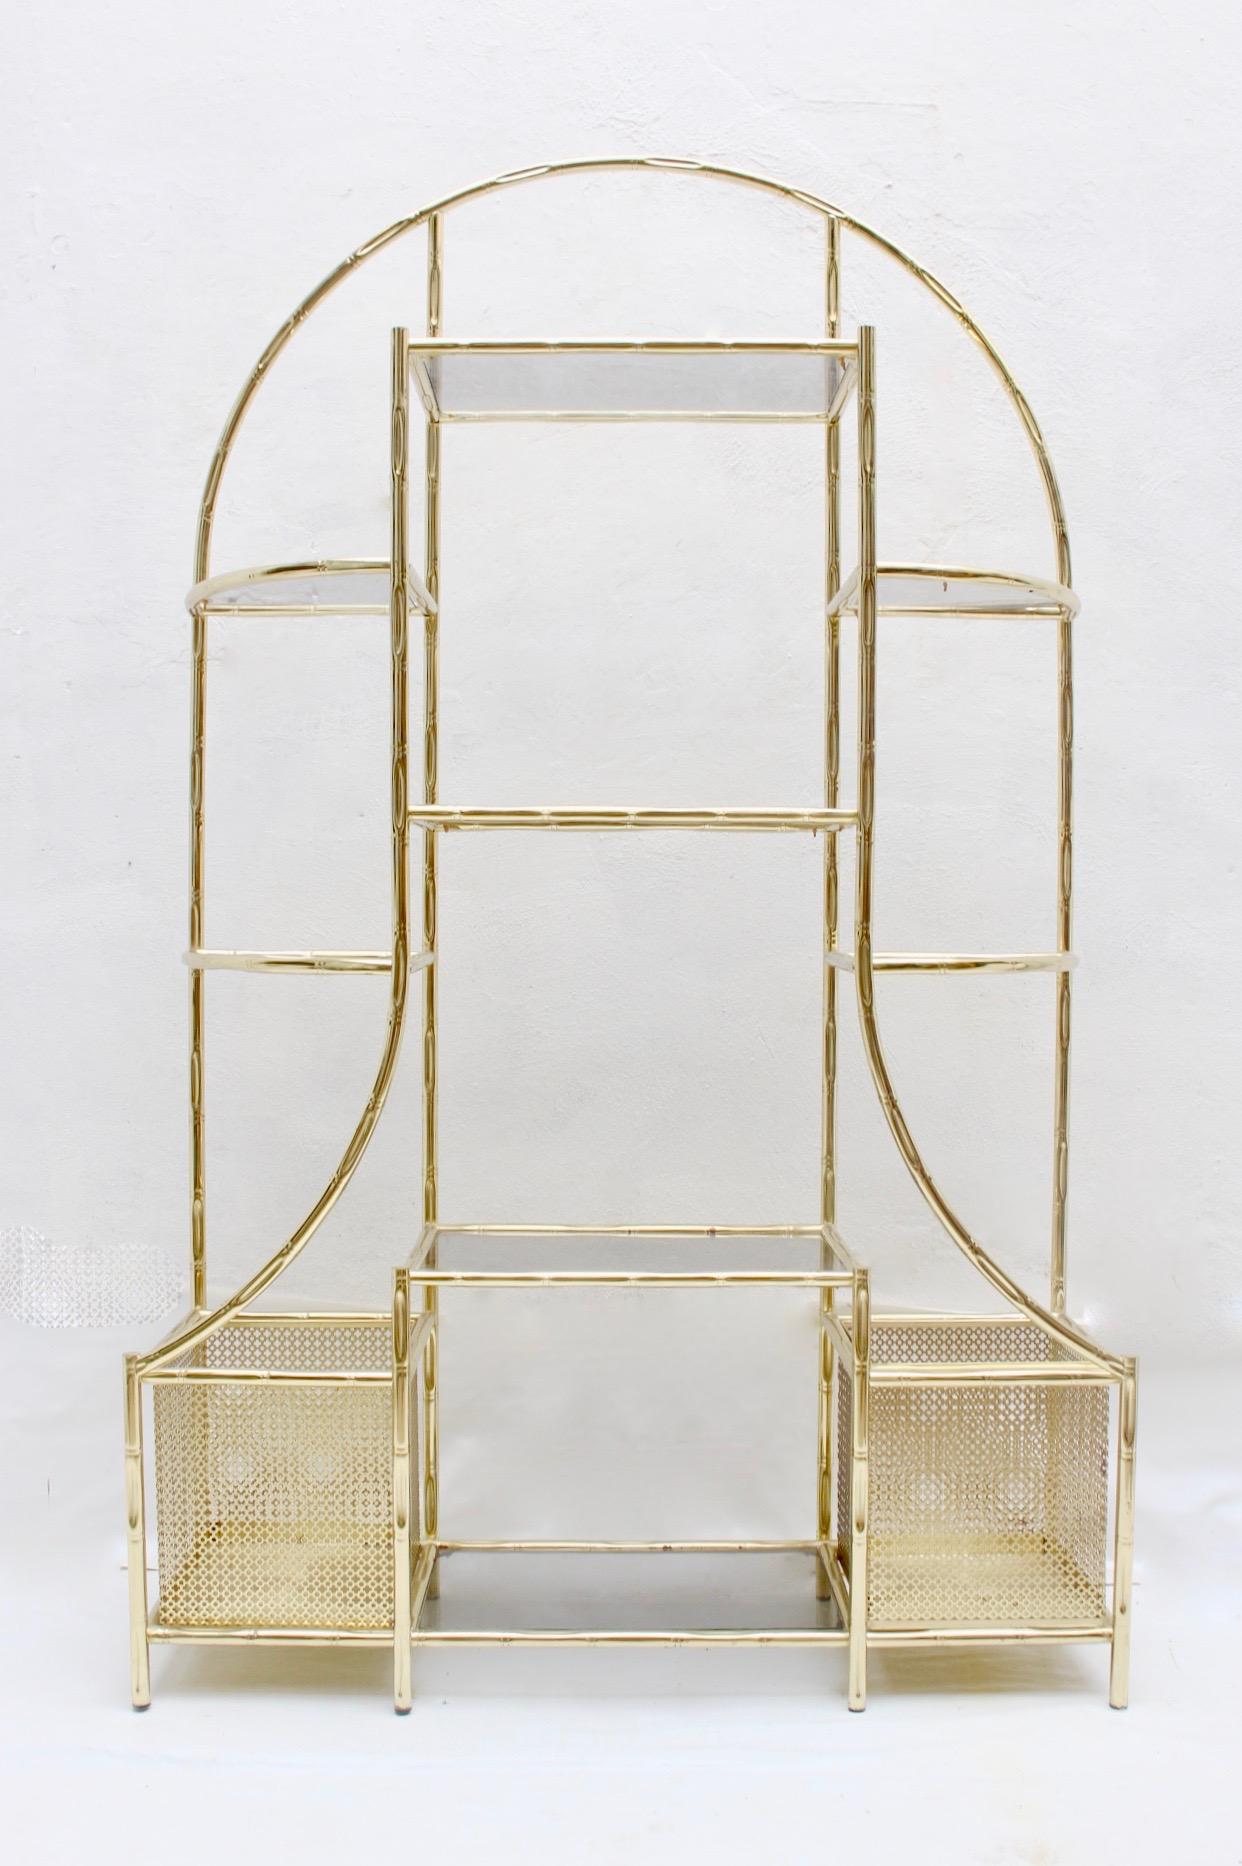 Midcentury faux bamboo étagère. Iron and smoked glass, Spain, 1970s.
With two side baskets, which can be used as planters, magazine rack, etc...
Very good condition with very light wear.